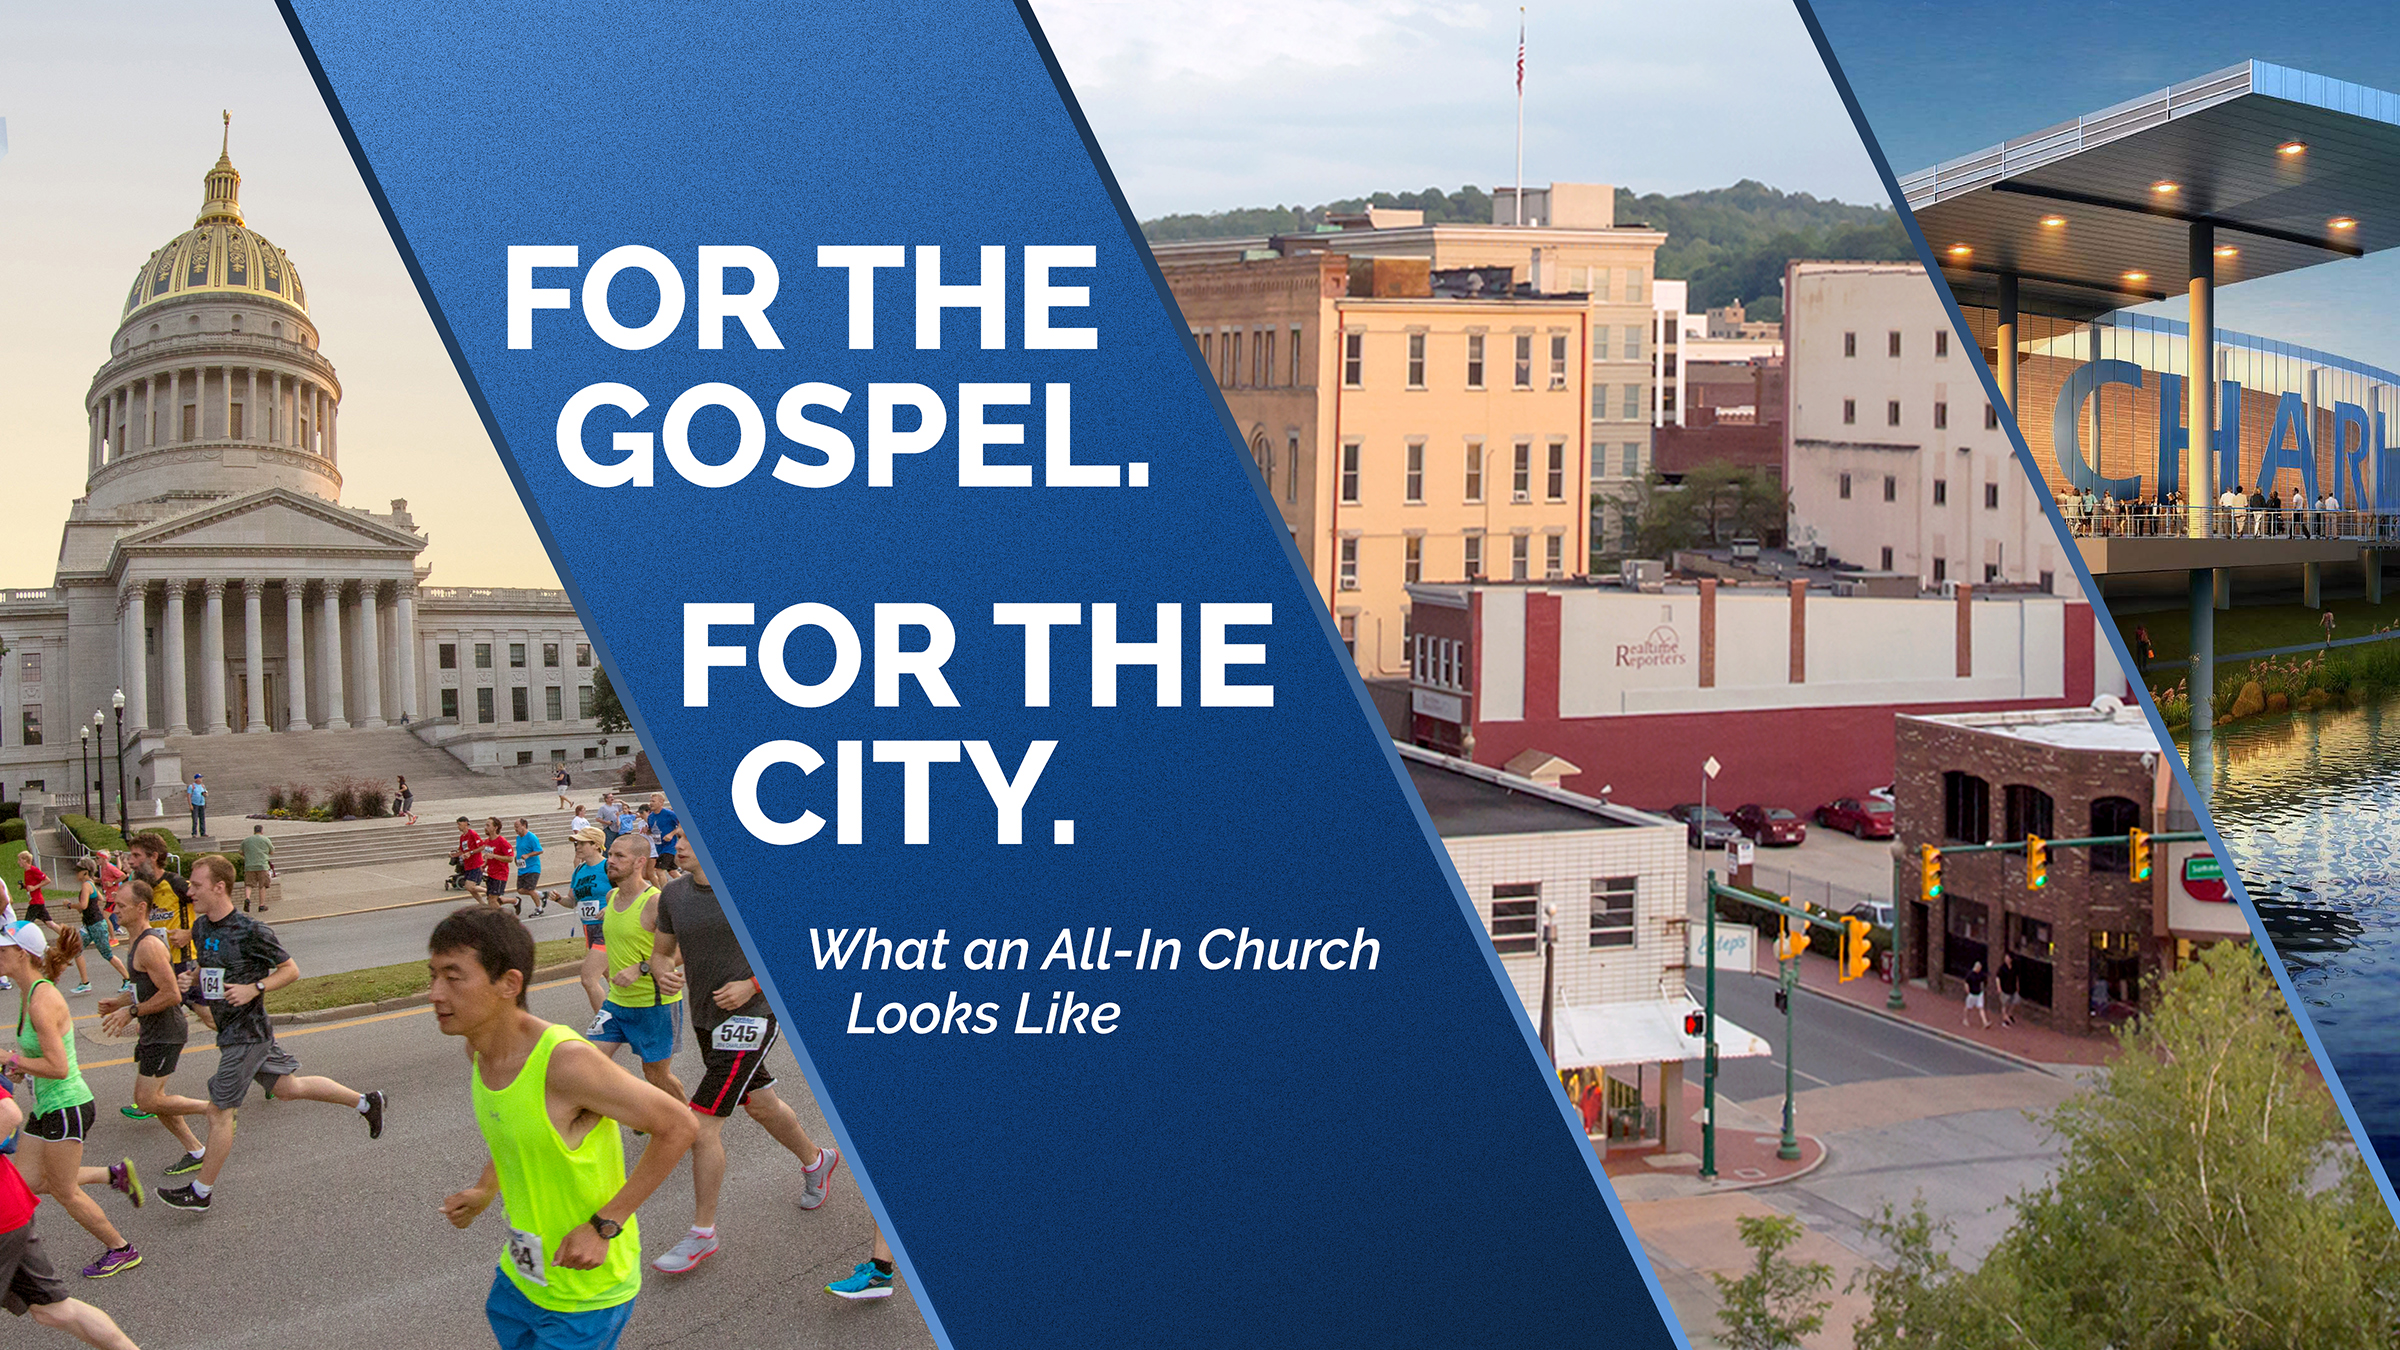 For the Gospel. For the City.